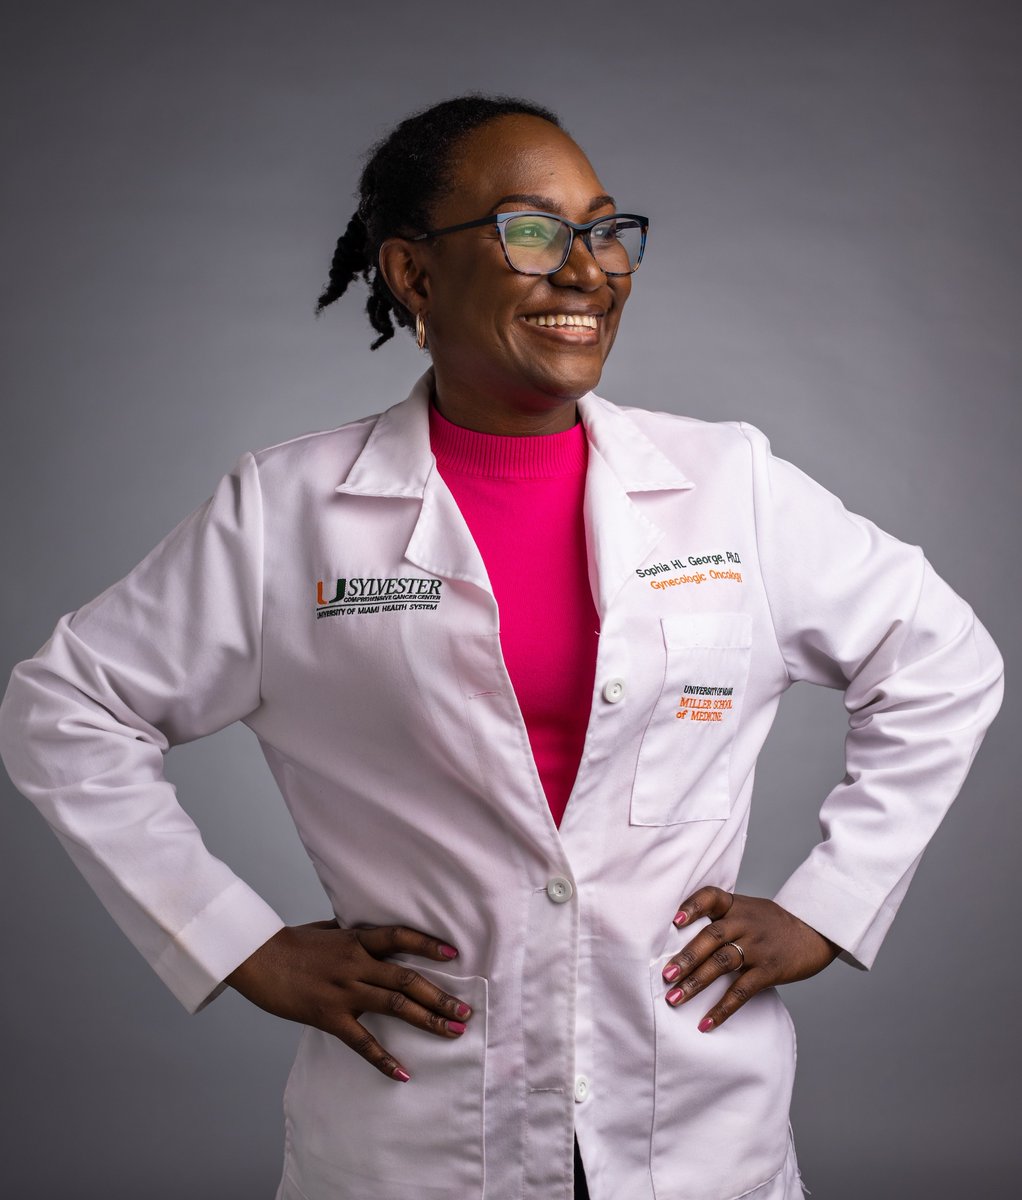 Congratulations, Dr. Sophia George, on being selected to receive the Provost's Excellence in Diversity, Equity and Inclusion award from @univmiami! Thank you for your commitment to fostering a campus community where every voice is heard, valued and respected. #OnlySylvester